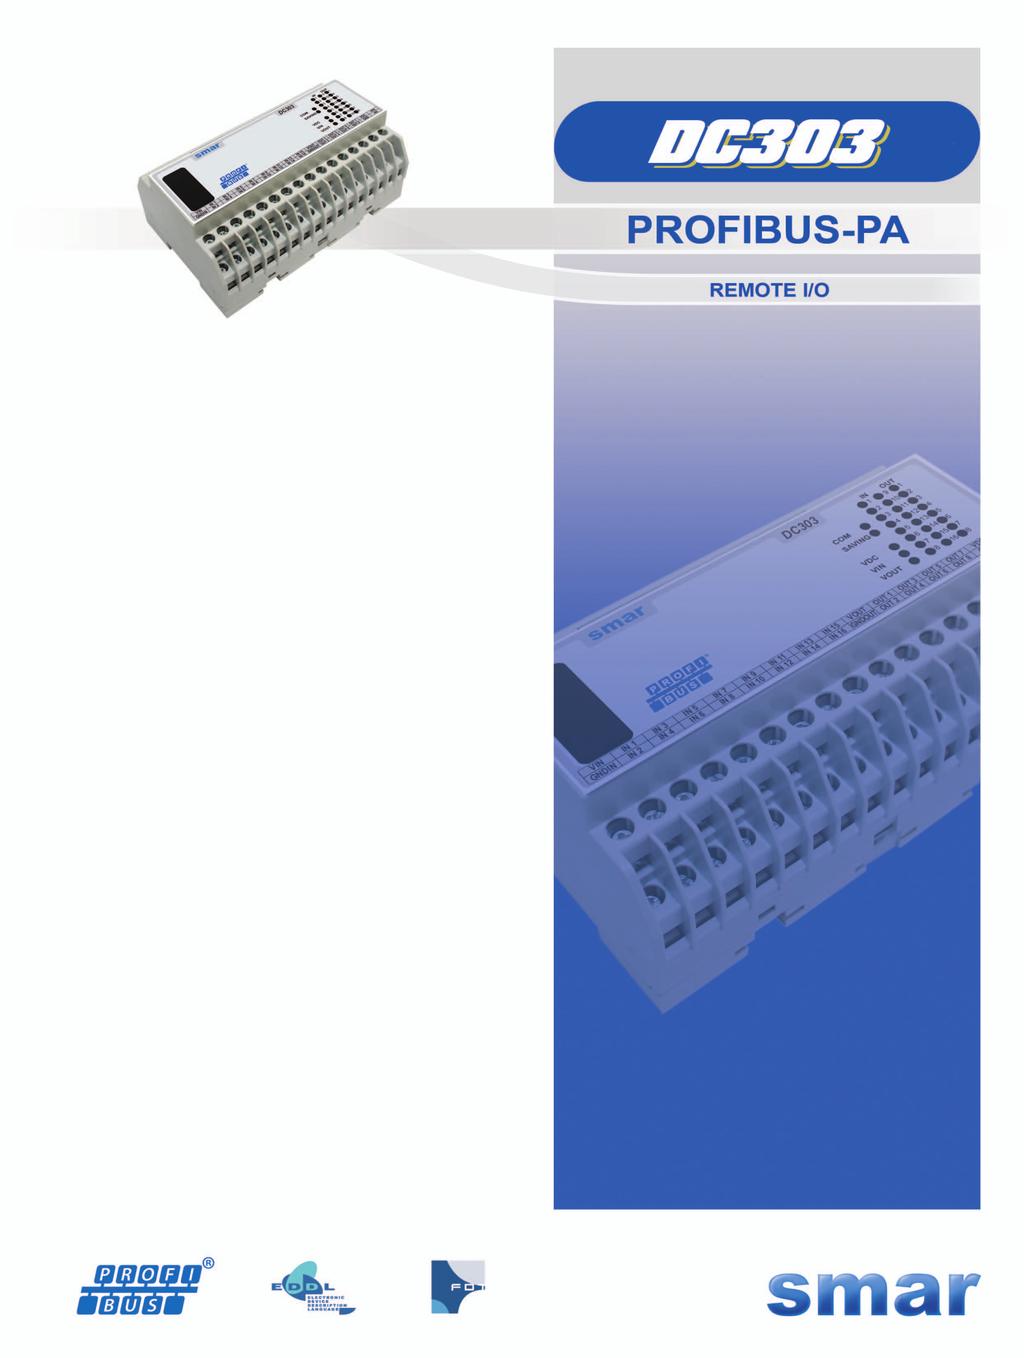 Discrete I/O connected direct onto Profibus-PA Input and Output Function Blocks, including Flexible Function Block (FFB) for